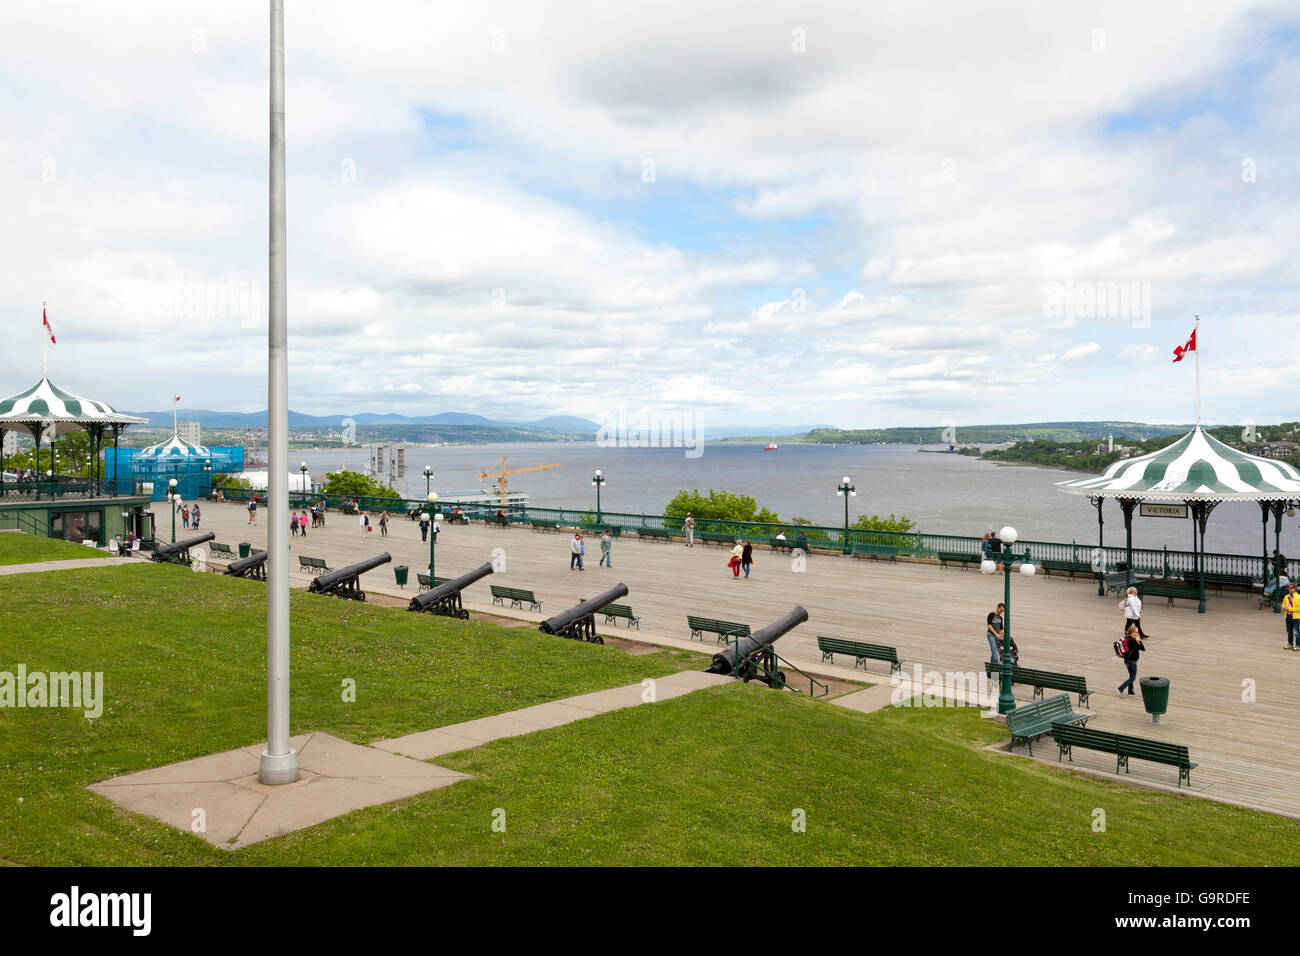 The promenade of Quebec city (La Promenade des Gouverneurs) looking out over the Saint Lawrence River Stock Photo